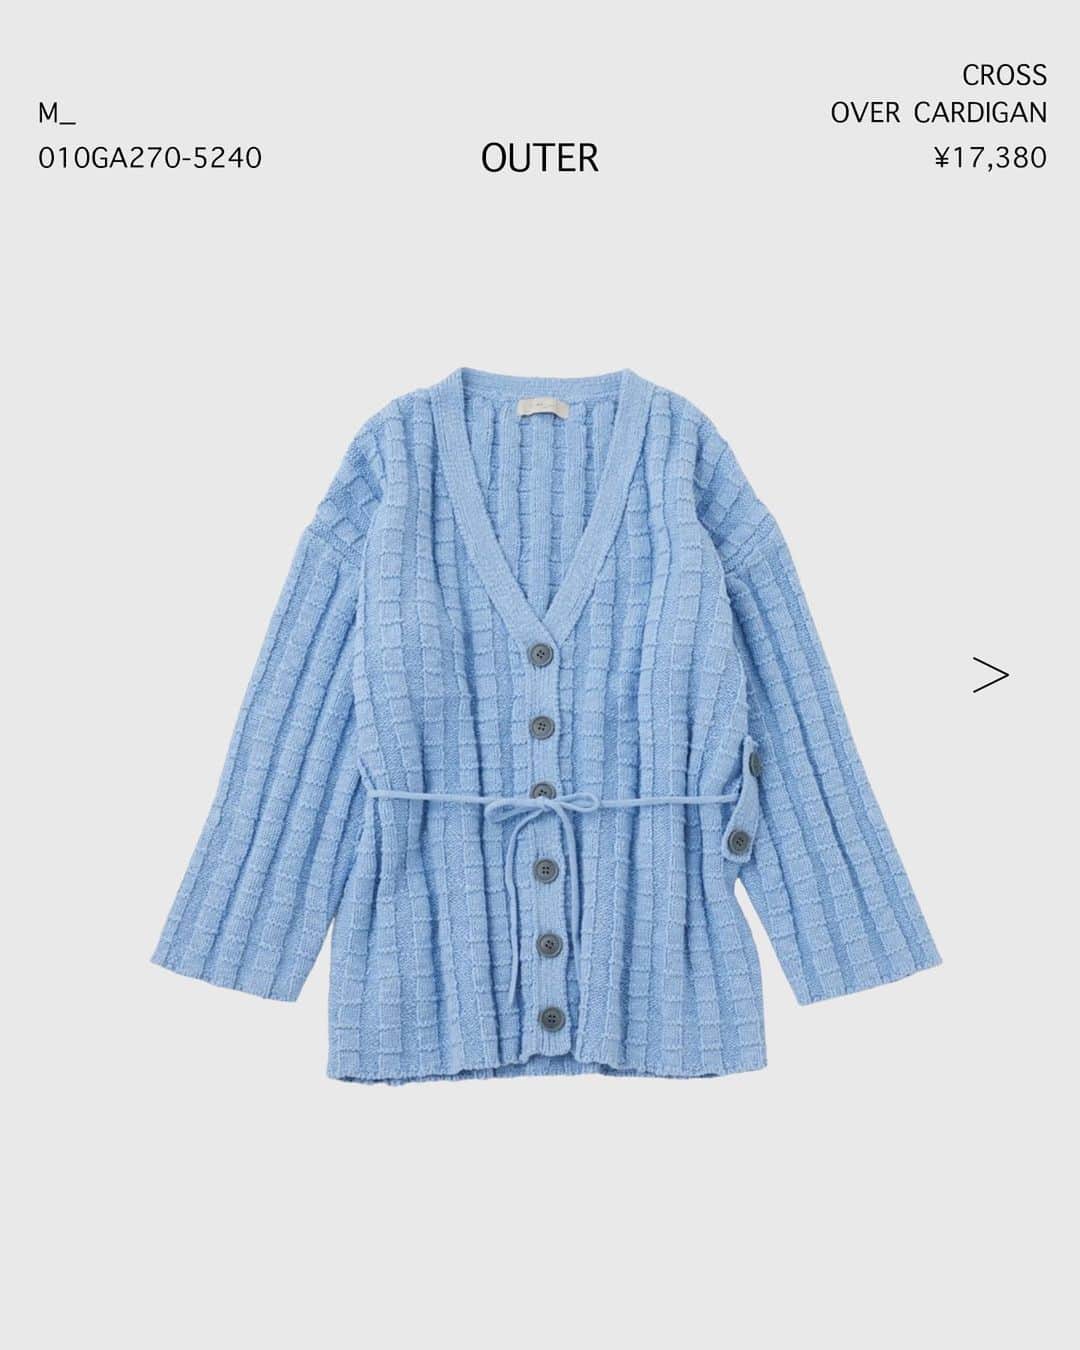 SHEL'TTER WEB STOREさんのインスタグラム写真 - (SHEL'TTER WEB STOREInstagram)「【NEW IN】 - OUTER -  ━━━━━━━━━━━━━━━━  【AZUL BY MOUSSY PLUS】レイヤードテーラージャケット ¥30,800 tax in Size：FREE Color：CAM,GRY No：250GAY30-143H ※発売中  【MOUSSY】F／LEATHER BIG ジャケット ¥15,950 tax in Size：FREE Color：BLK,BRN,KHA No：010GA630-6320 ※発売中  【M_】クロスオーバー カーディガン ¥17,380 tax in Size：FREE Color：BLU,WHT,BLK No：010GA270-5240 ※発売中  【AZUL BY MOUSSY】ダブルテーラードジャケット ¥6,990 tax in Size：FREE Color：GRY,BLK No：250GAT30-119H ※発売中  【crie conforto】パールボタンロングジレ ¥11,990 tax in Size：FREE Color：BLK,L/BEG,GRY No：254GAT30-089I ※発売中  気になるアイテムは画像をタップまたは  プロフィールのサイトURLをクリック✔  ━━━━━━━━━━━━━━━━  #SHELTTERWEBSTORE #SWS #MOUSSY #M_MOUSSY #M_  #AZULBYMOUSSY #crieconforto  #newin #2023AW #autumn2023 #autumnjacket #tailoredjacket #cardigan #leatherjacket #gilet  #新作 #ライトアウター #テーラードジャケット #ジャケット #カーディガン #ジレ #ロングジレ #テーラード #レザージャケット #フェイクレザー #オーバーサイズ」9月14日 18時59分 - sheltterwebstore